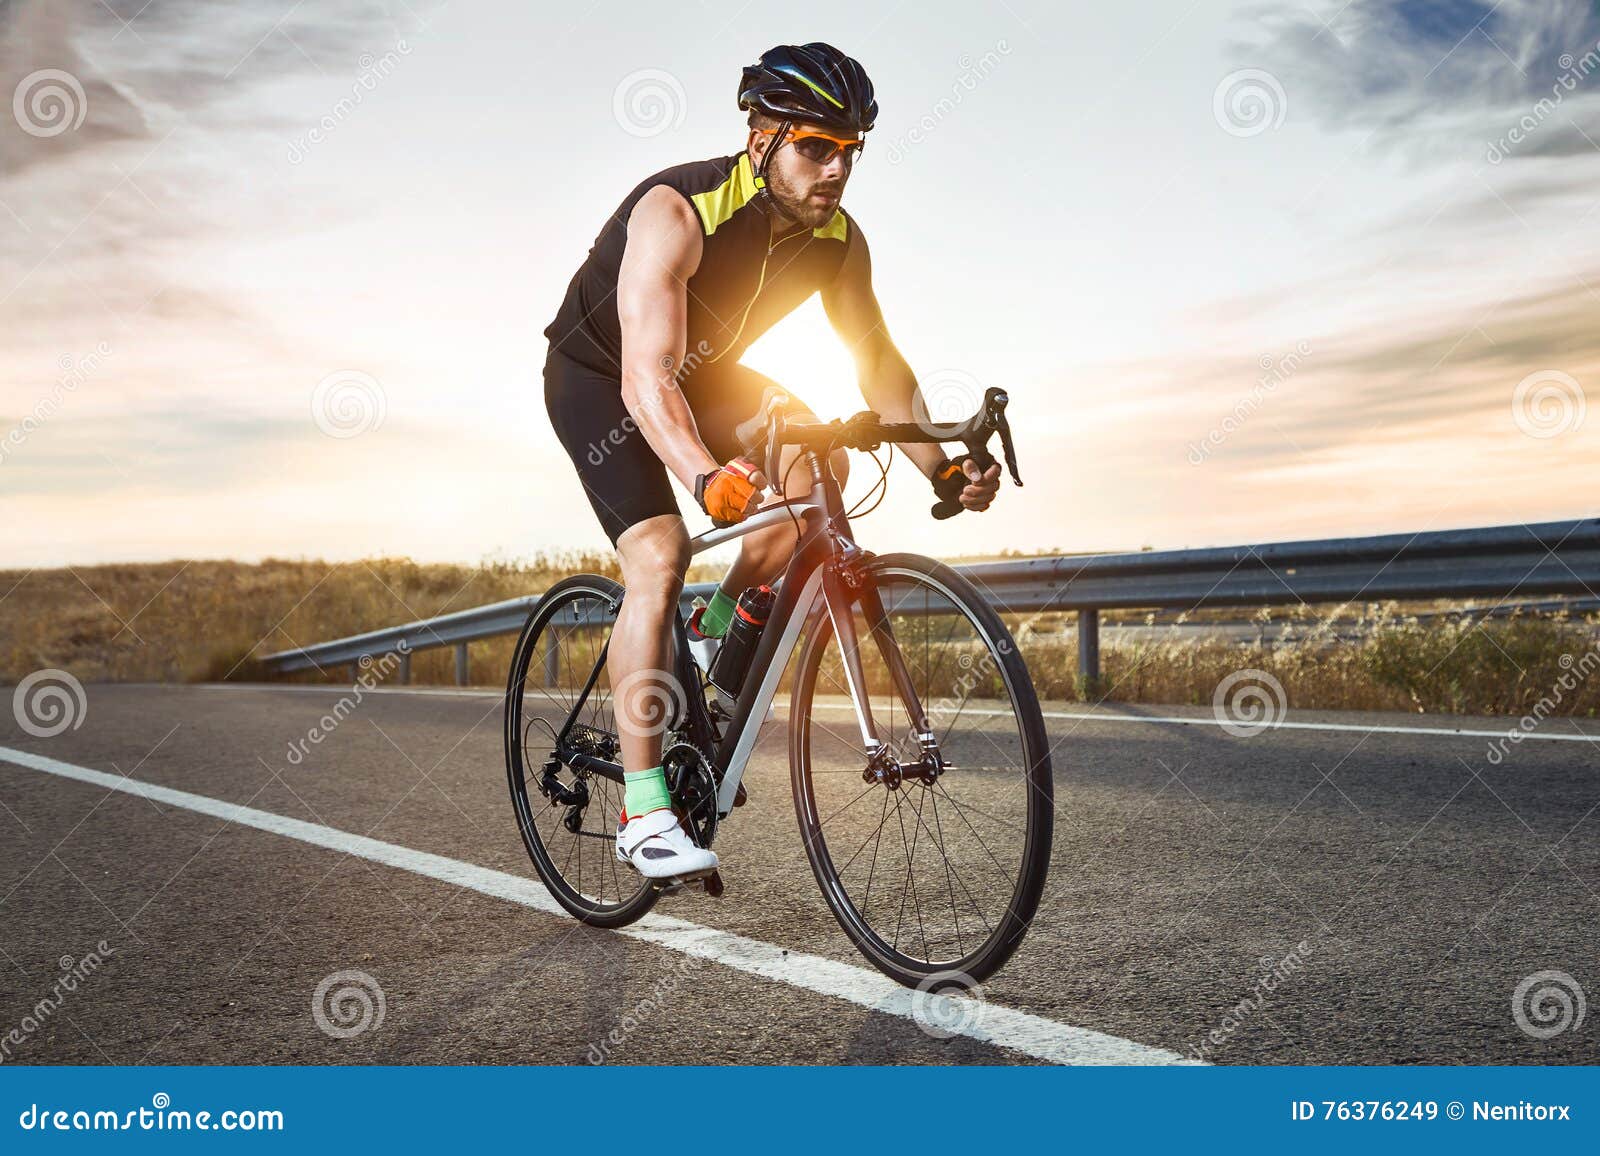 handsome young man cycling on the road.